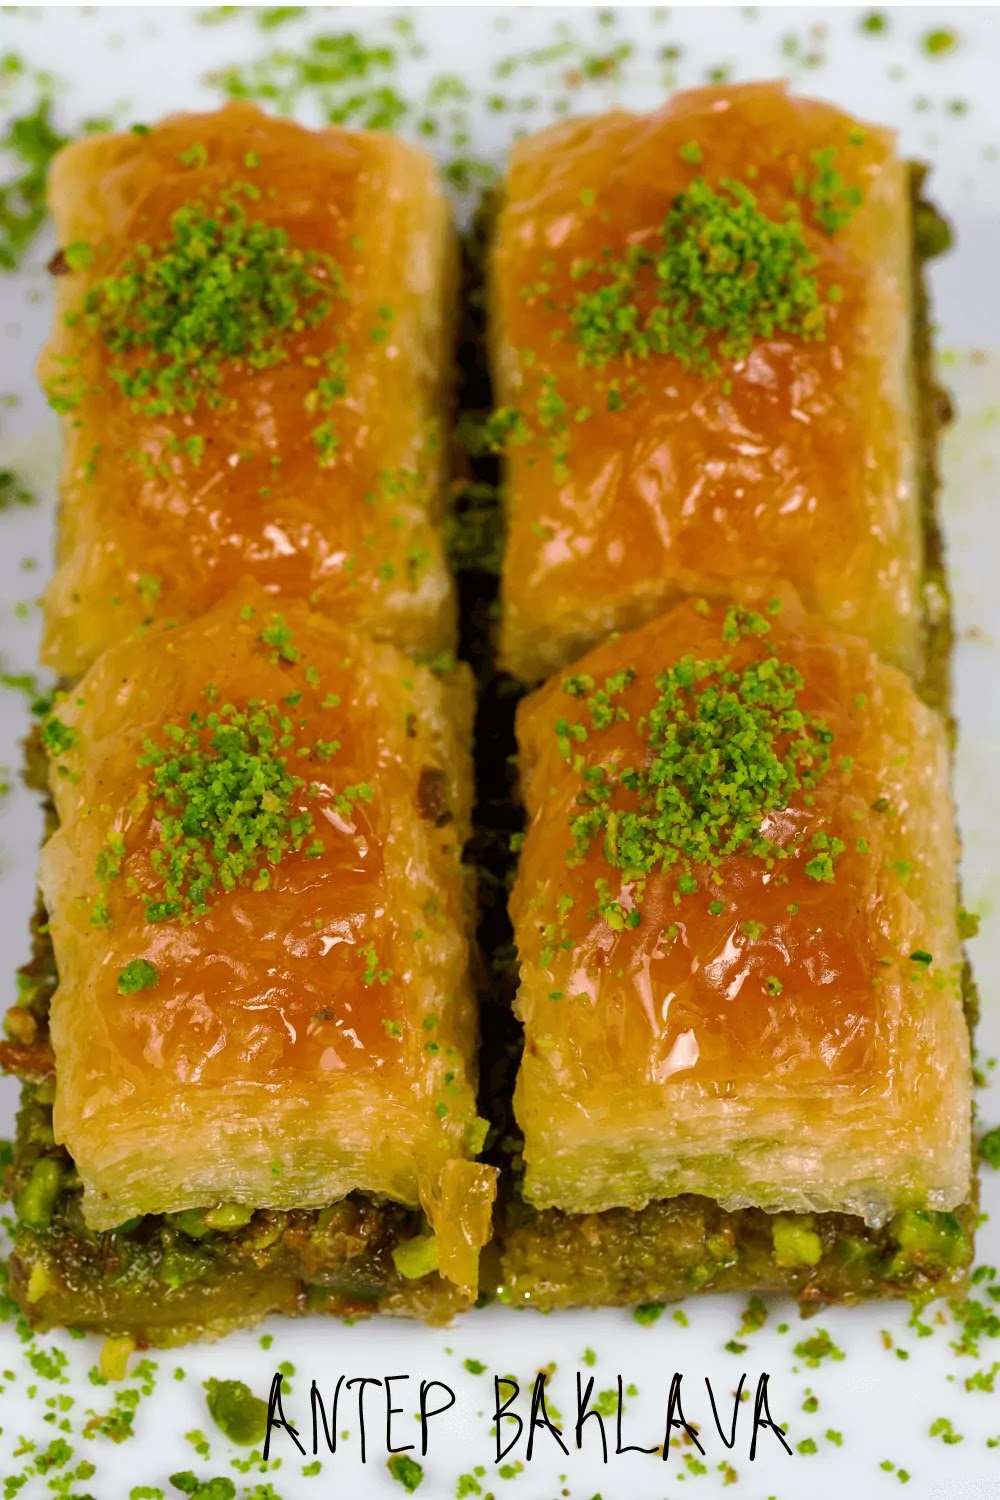 Six equal pieces of unabi baklava garnished with green pistachios